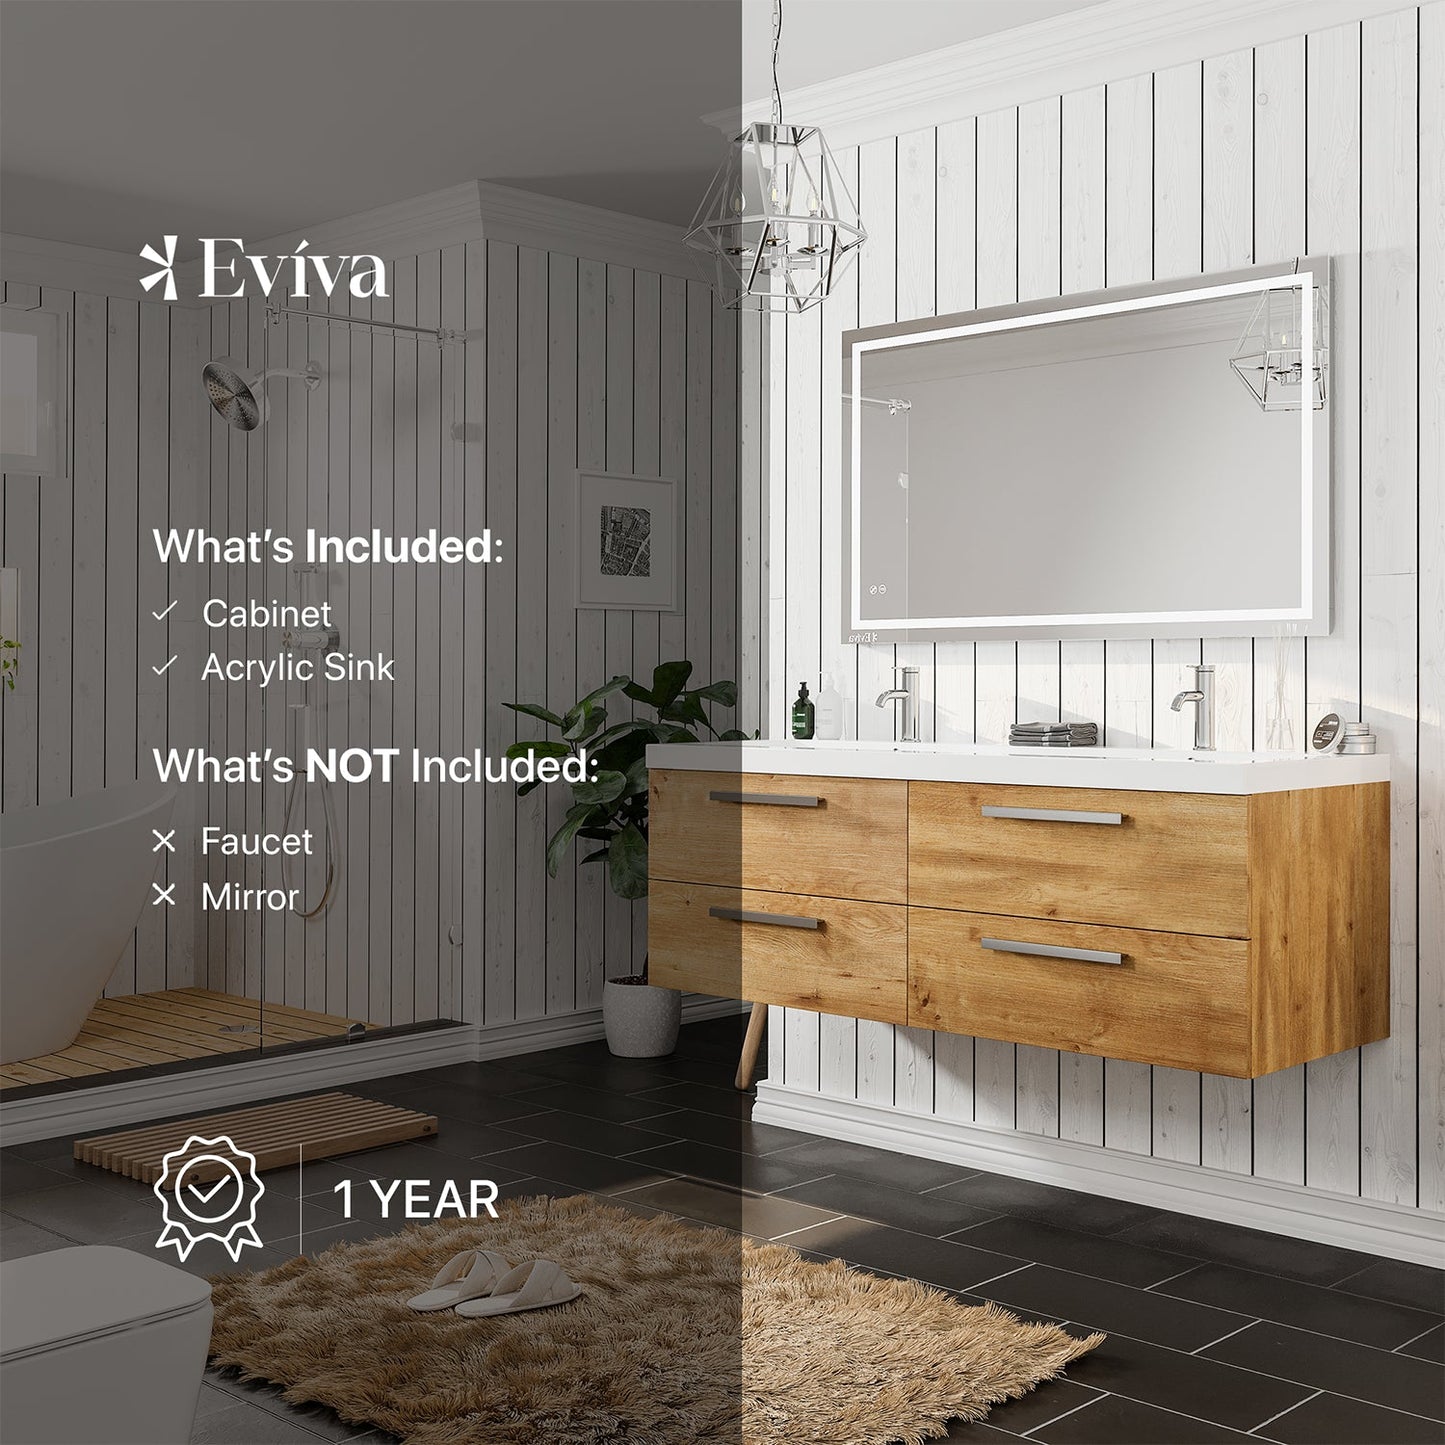 Eviva Surf 57" Natural Oak Modern Bathroom Vanity Set with Integrated White Acrylic Double Sink